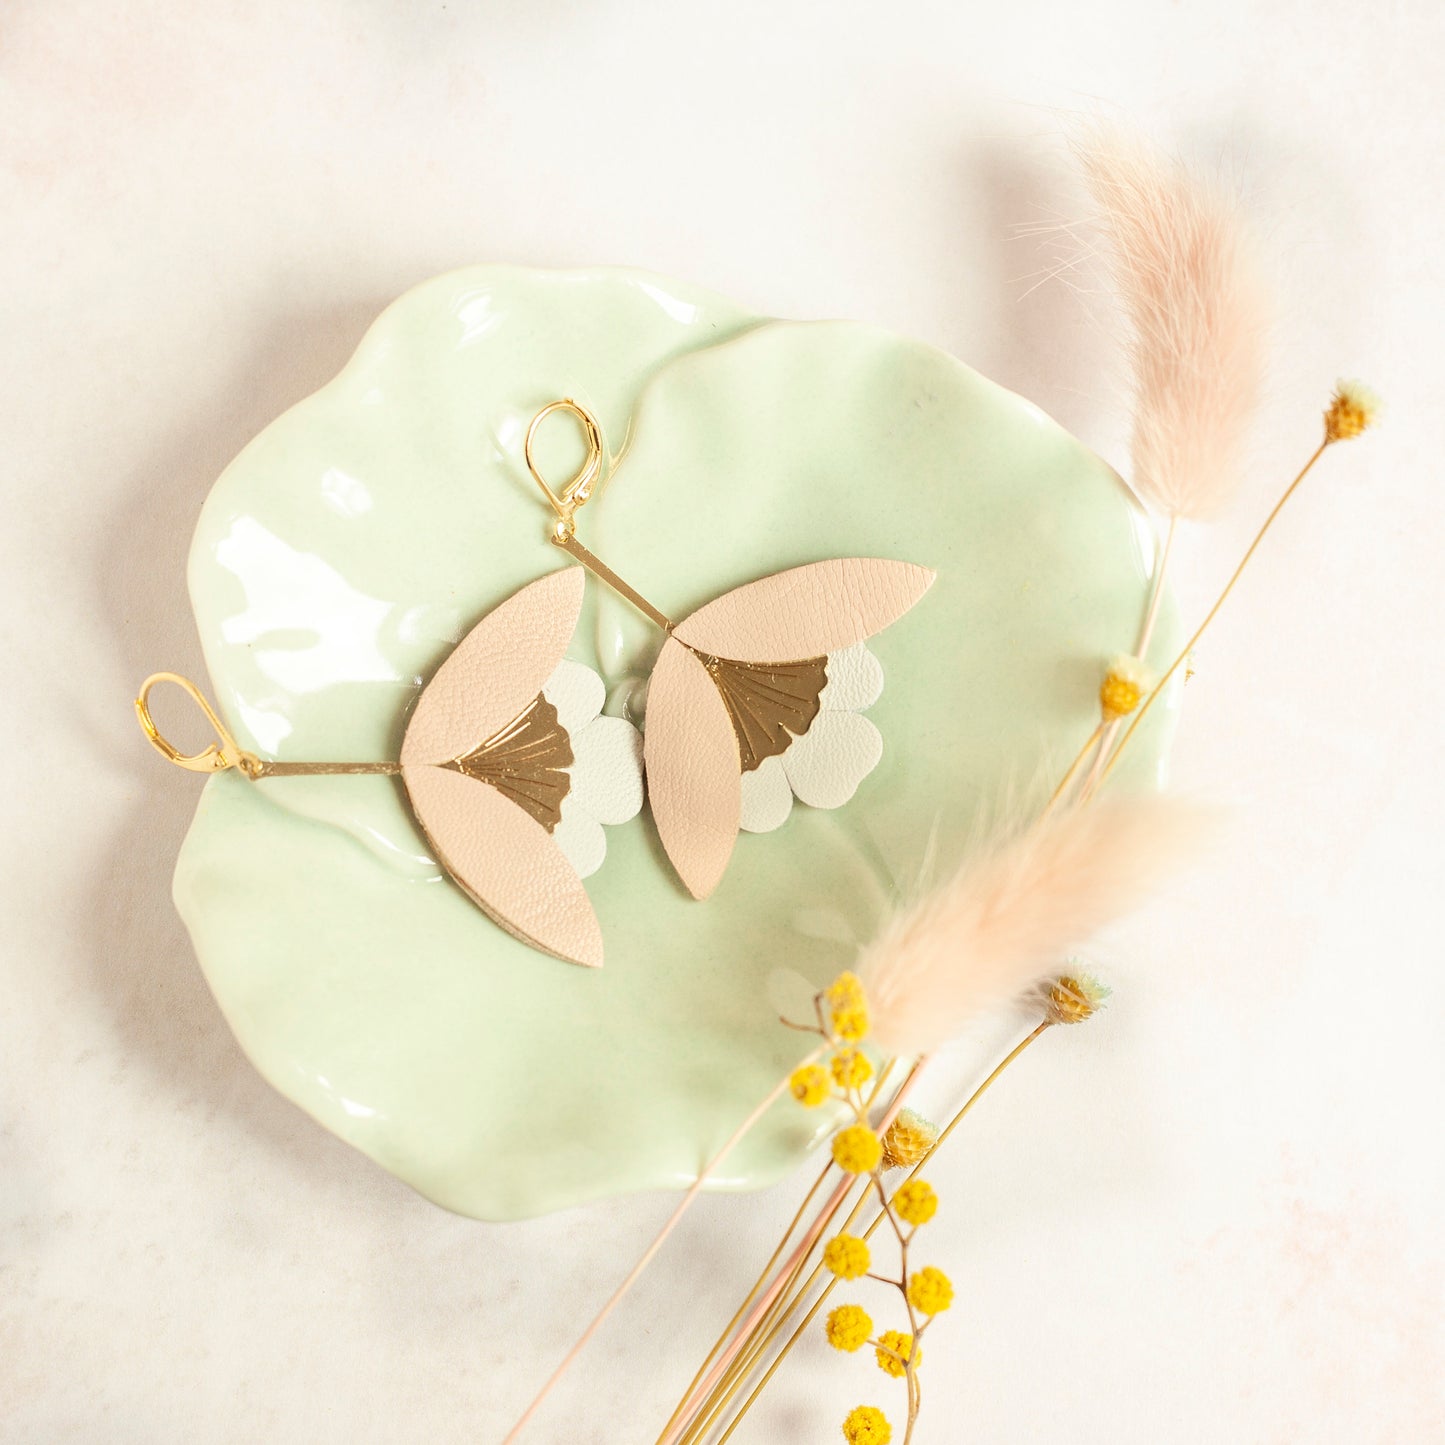 Ginkgo Flower earrings in white leather and flesh pink